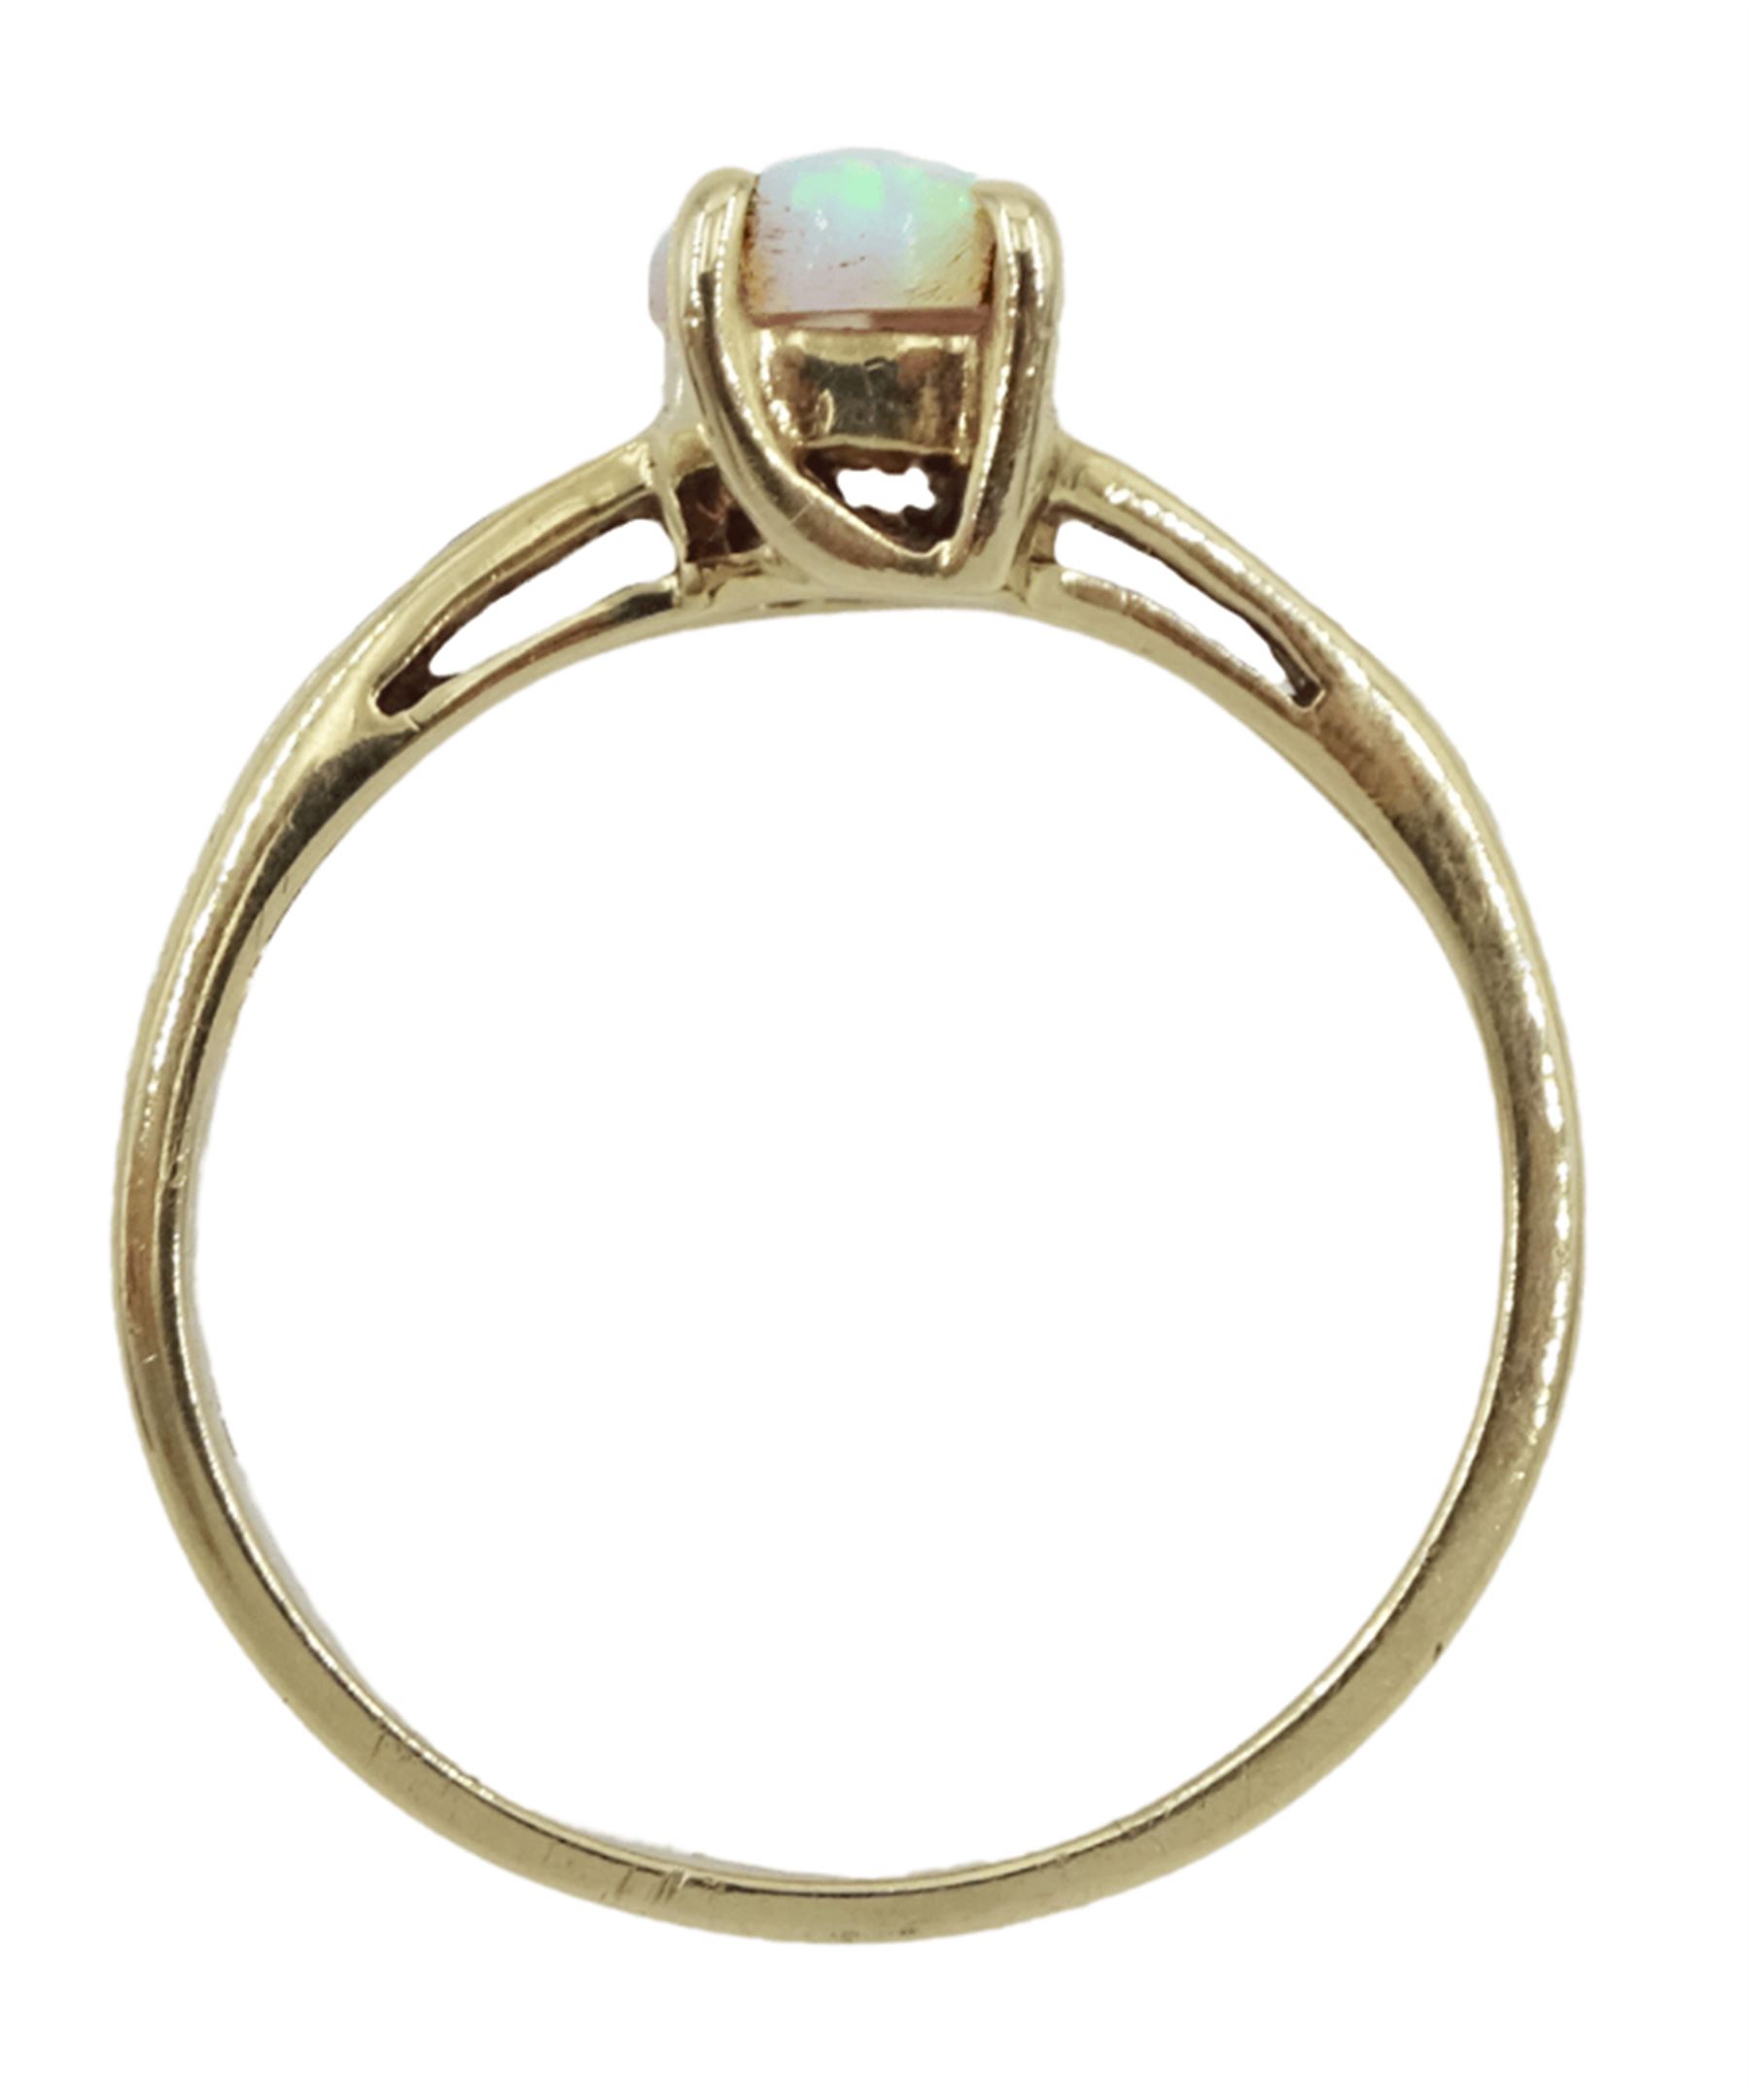 9ct gold single stone oval opal ring with cubic zirconia set shoulders - Image 4 of 4